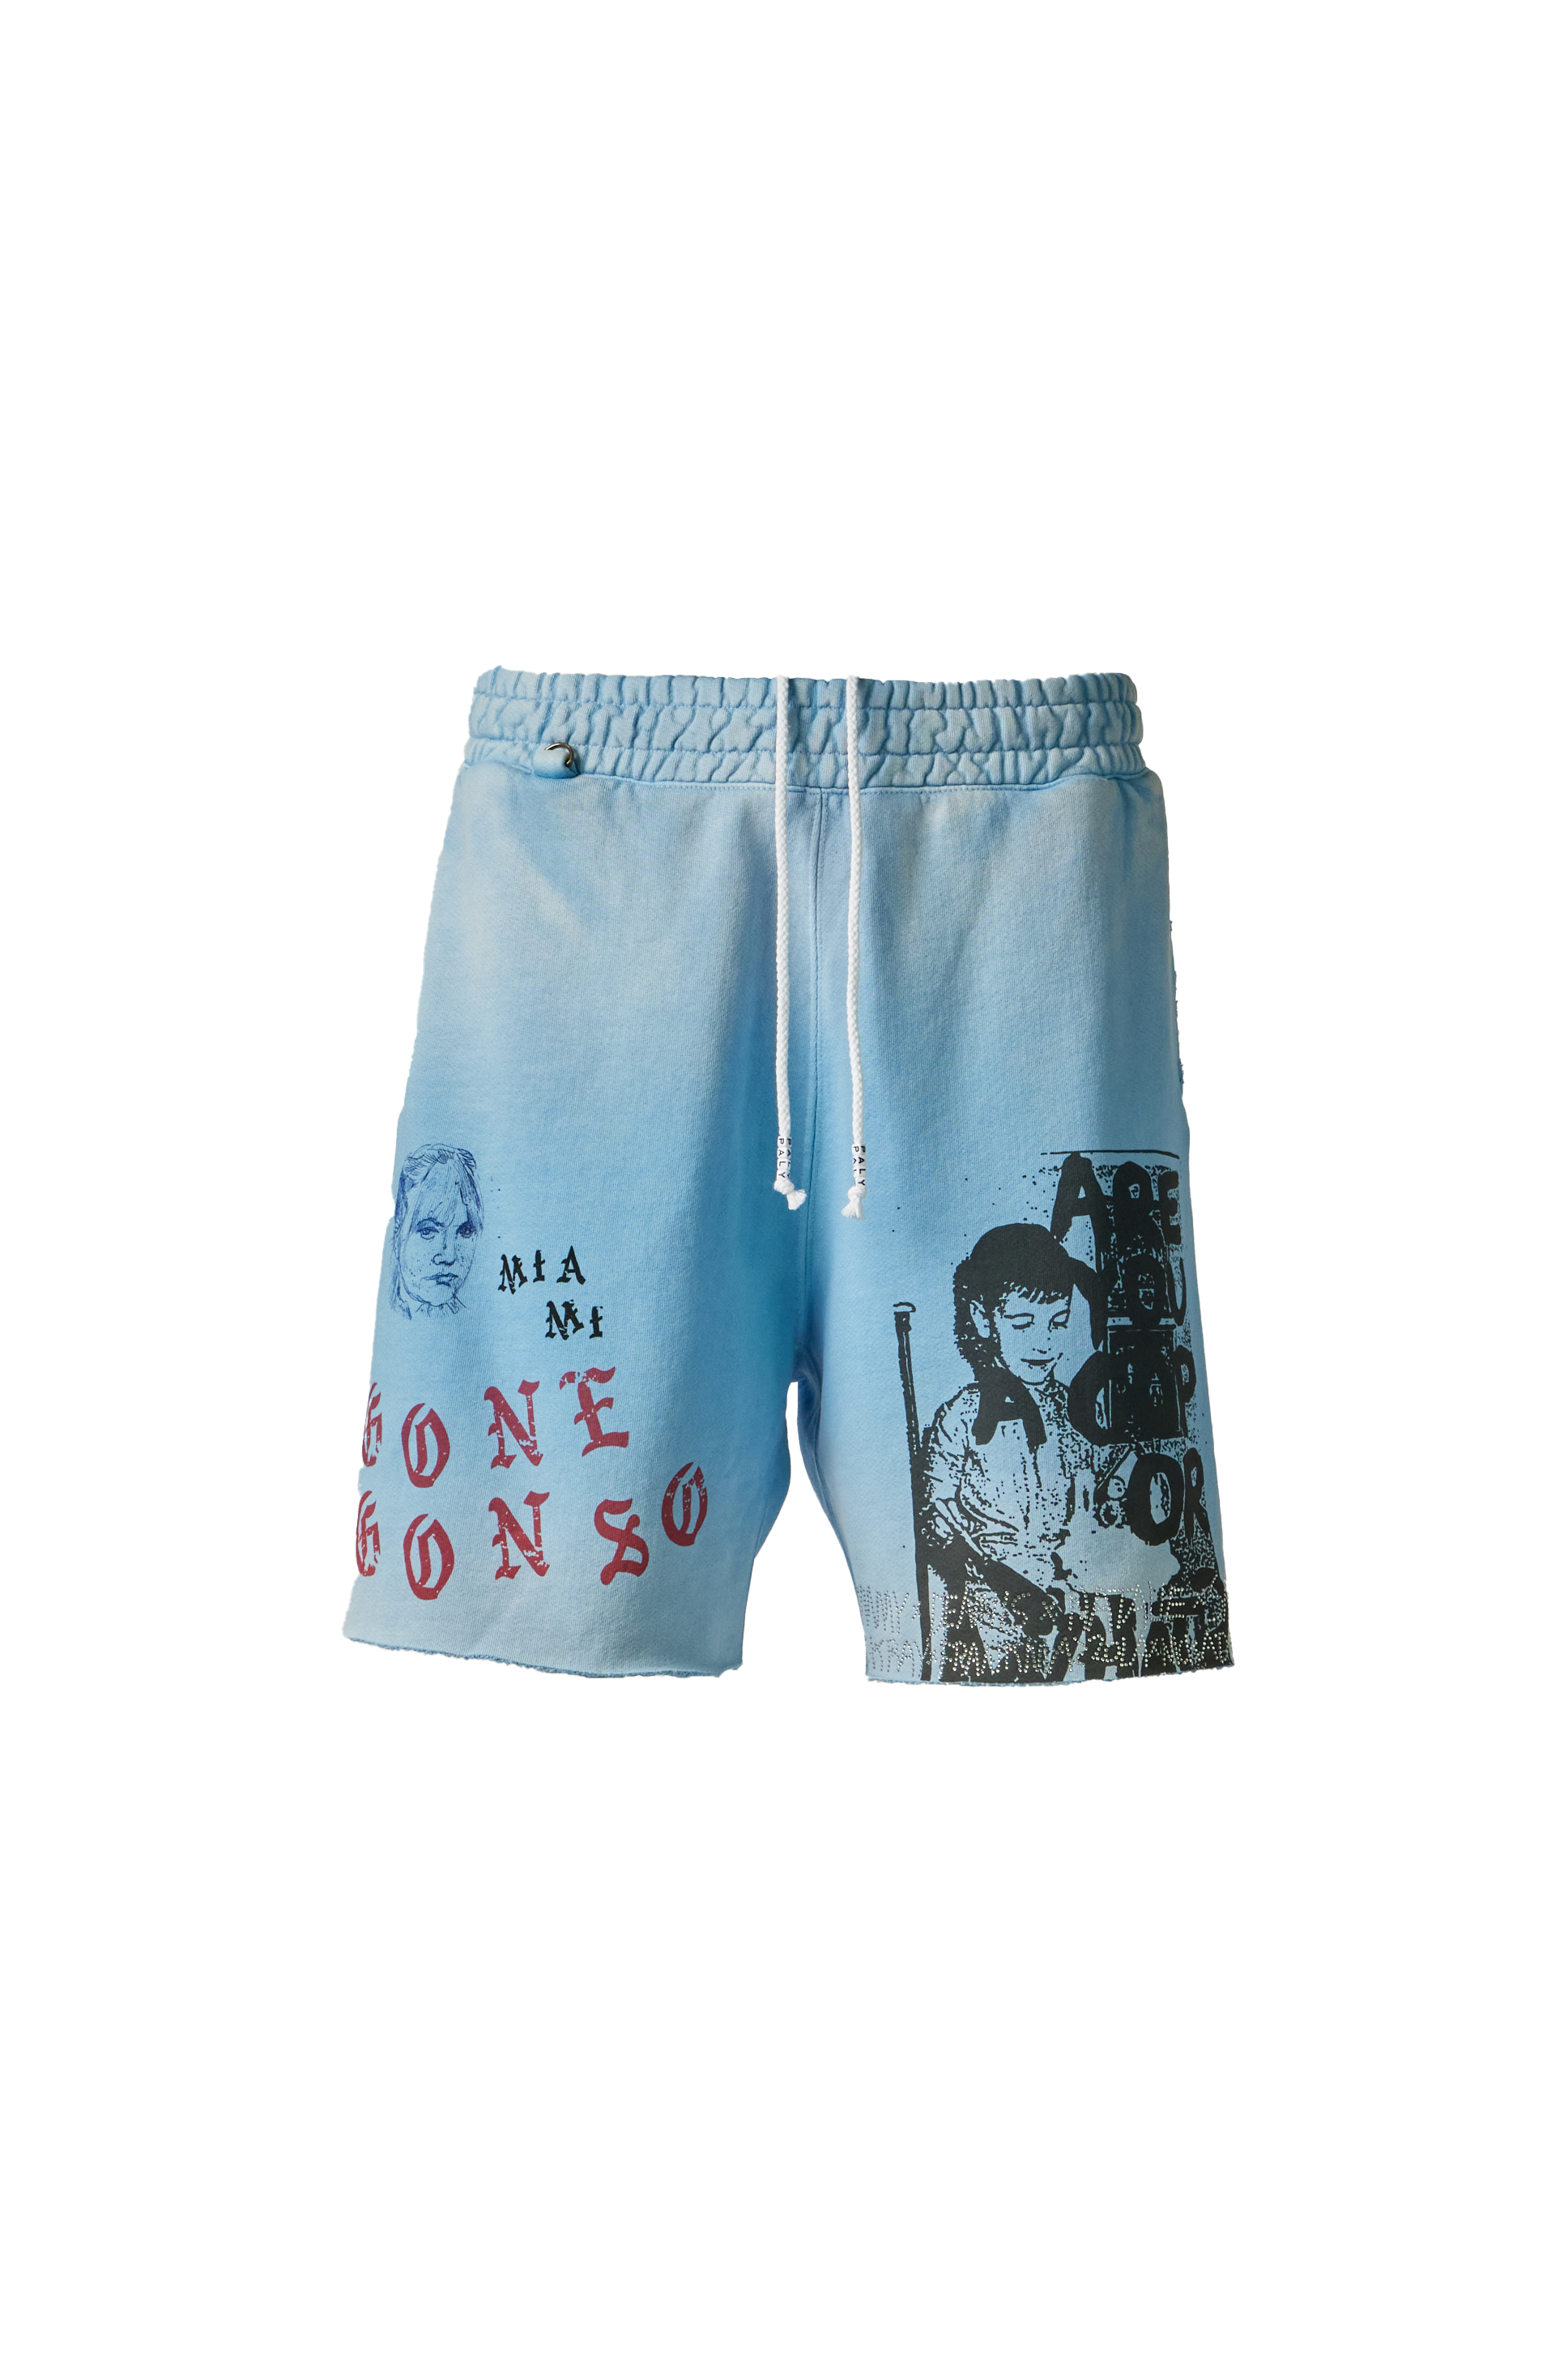 PALY - Gonso Miami Sweat Shorts product image